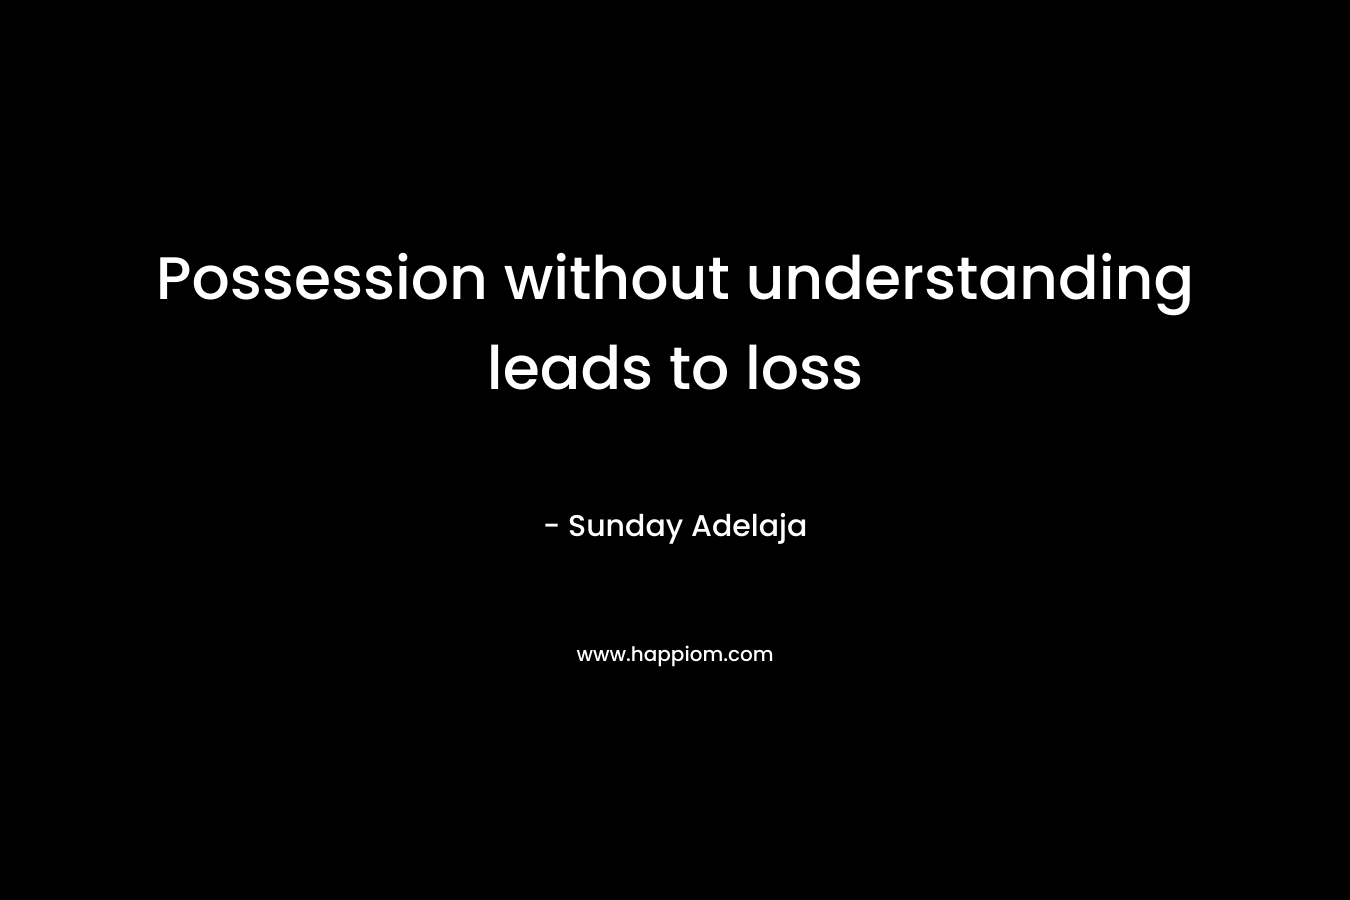 Possession without understanding leads to loss